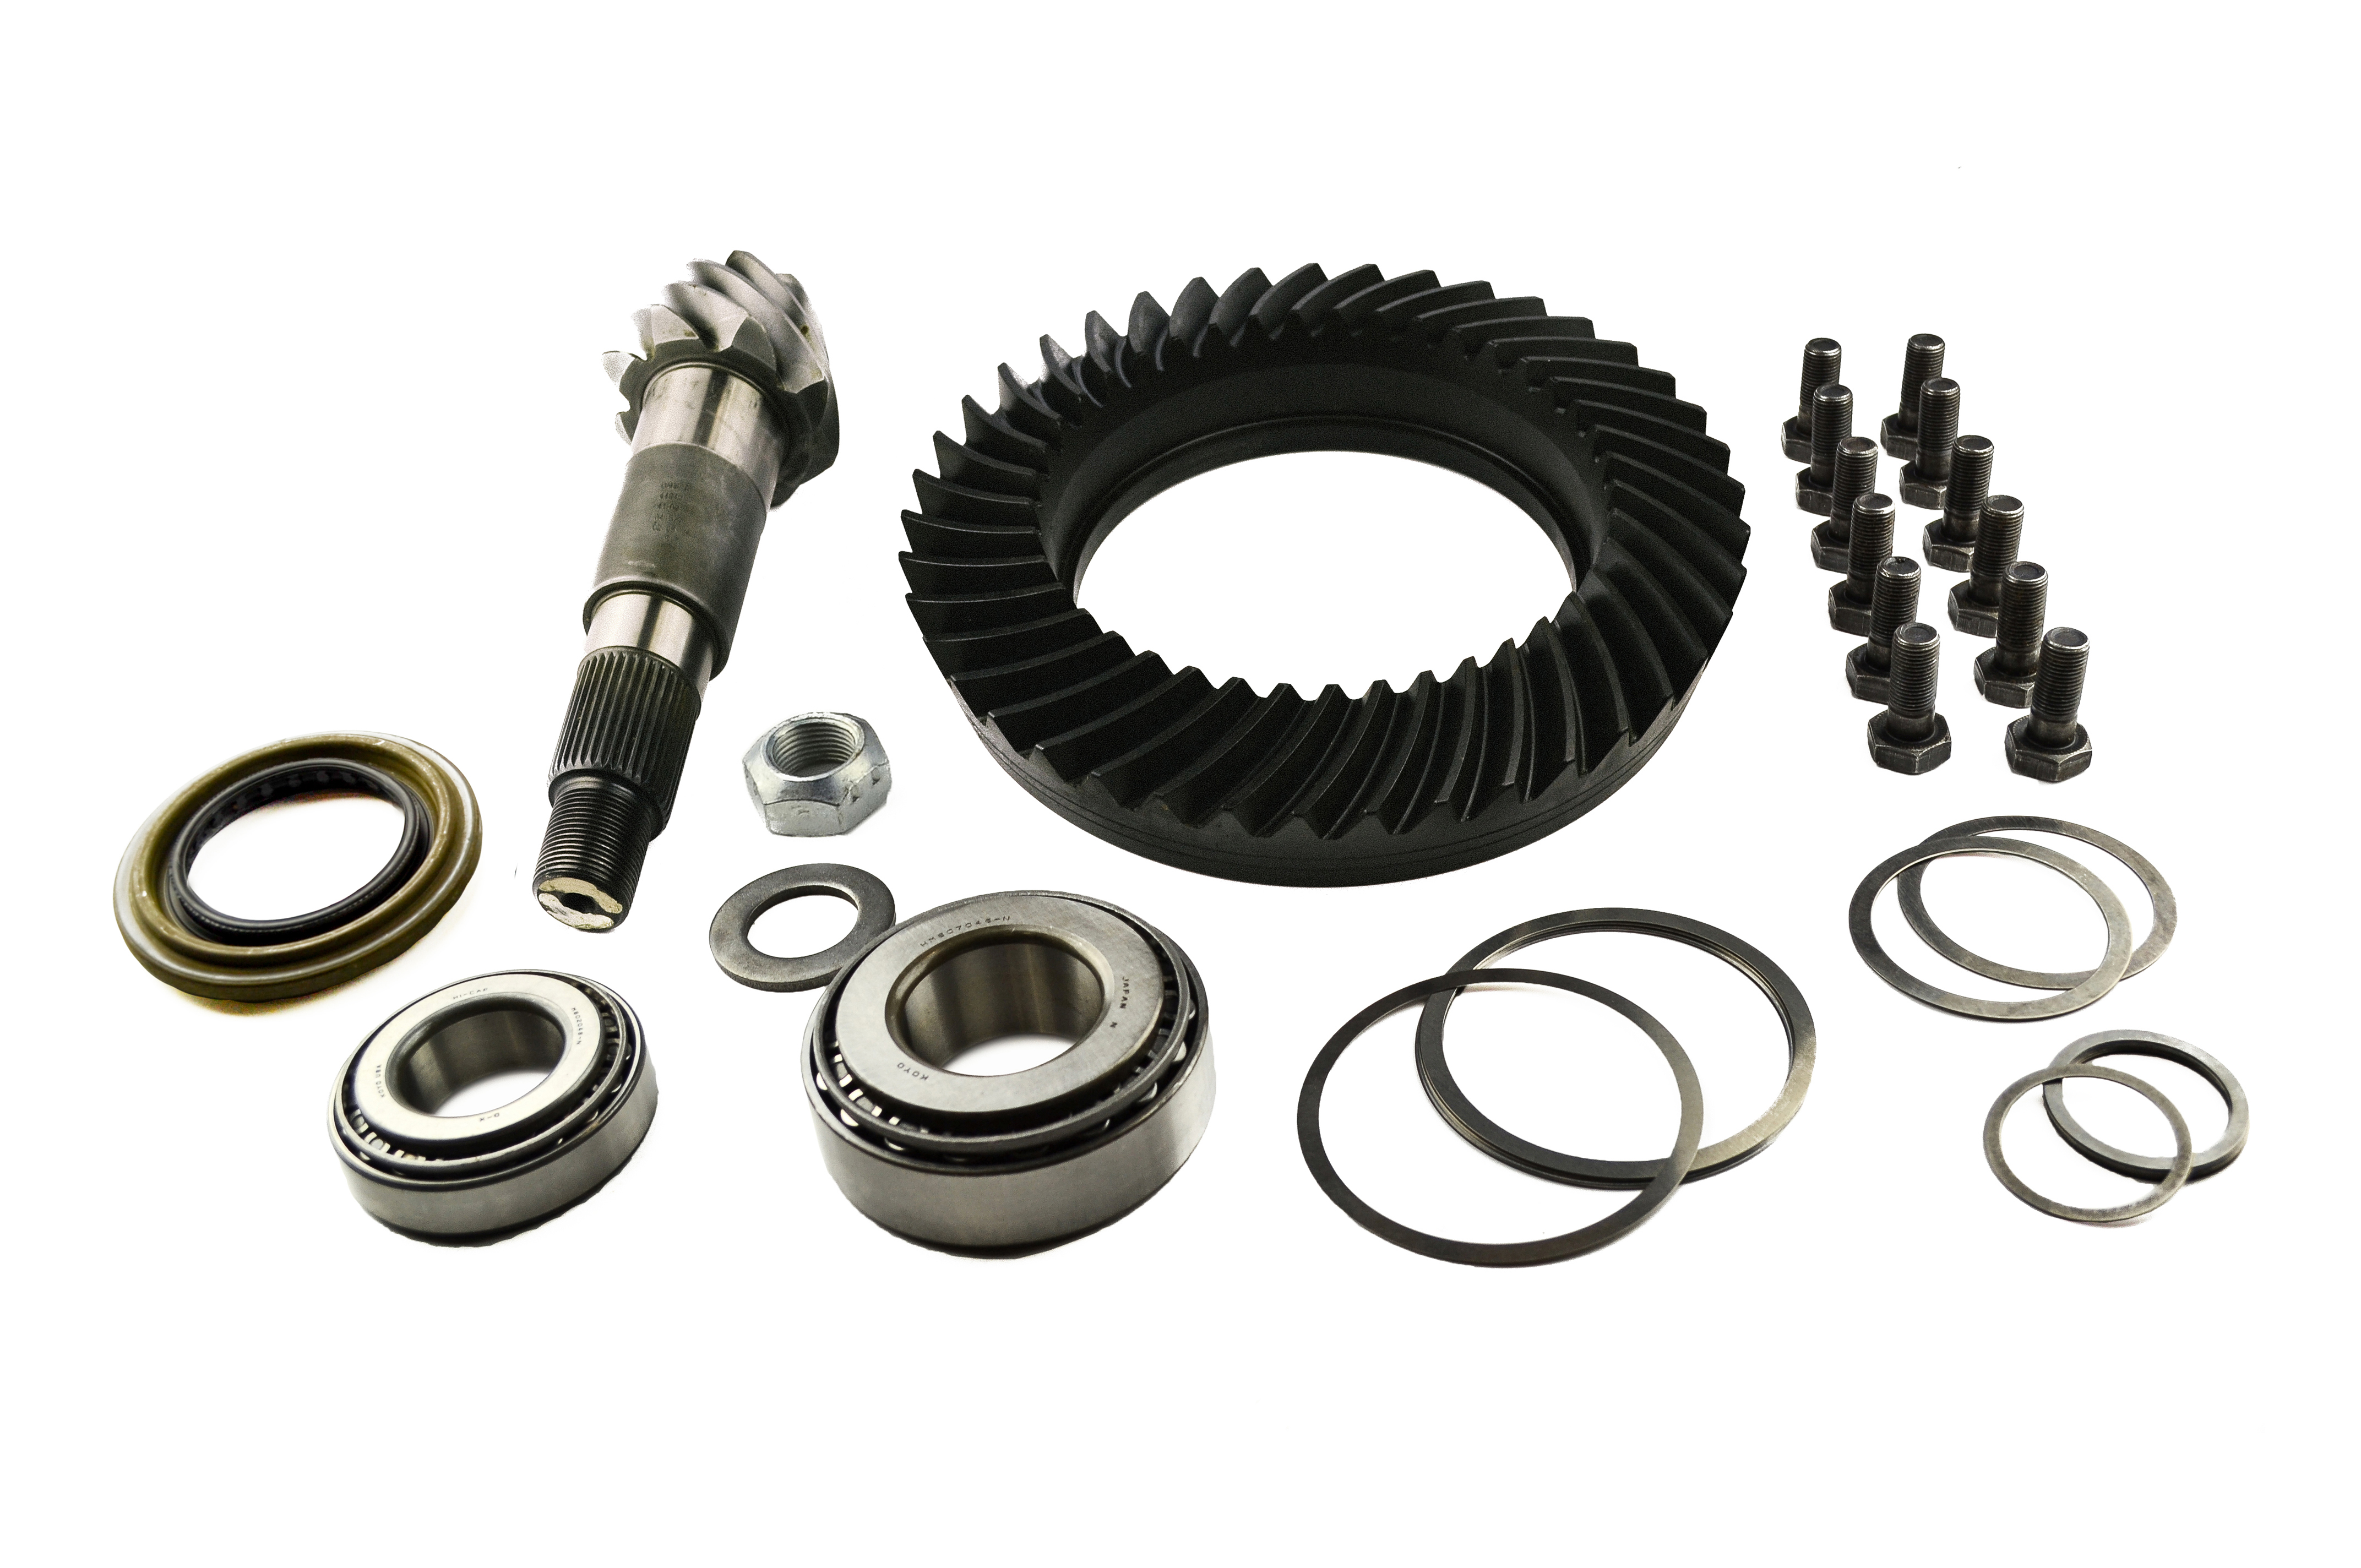 Spicer Ring and Pinion Kit for Dana 80 Axle, 5.13 Ratio